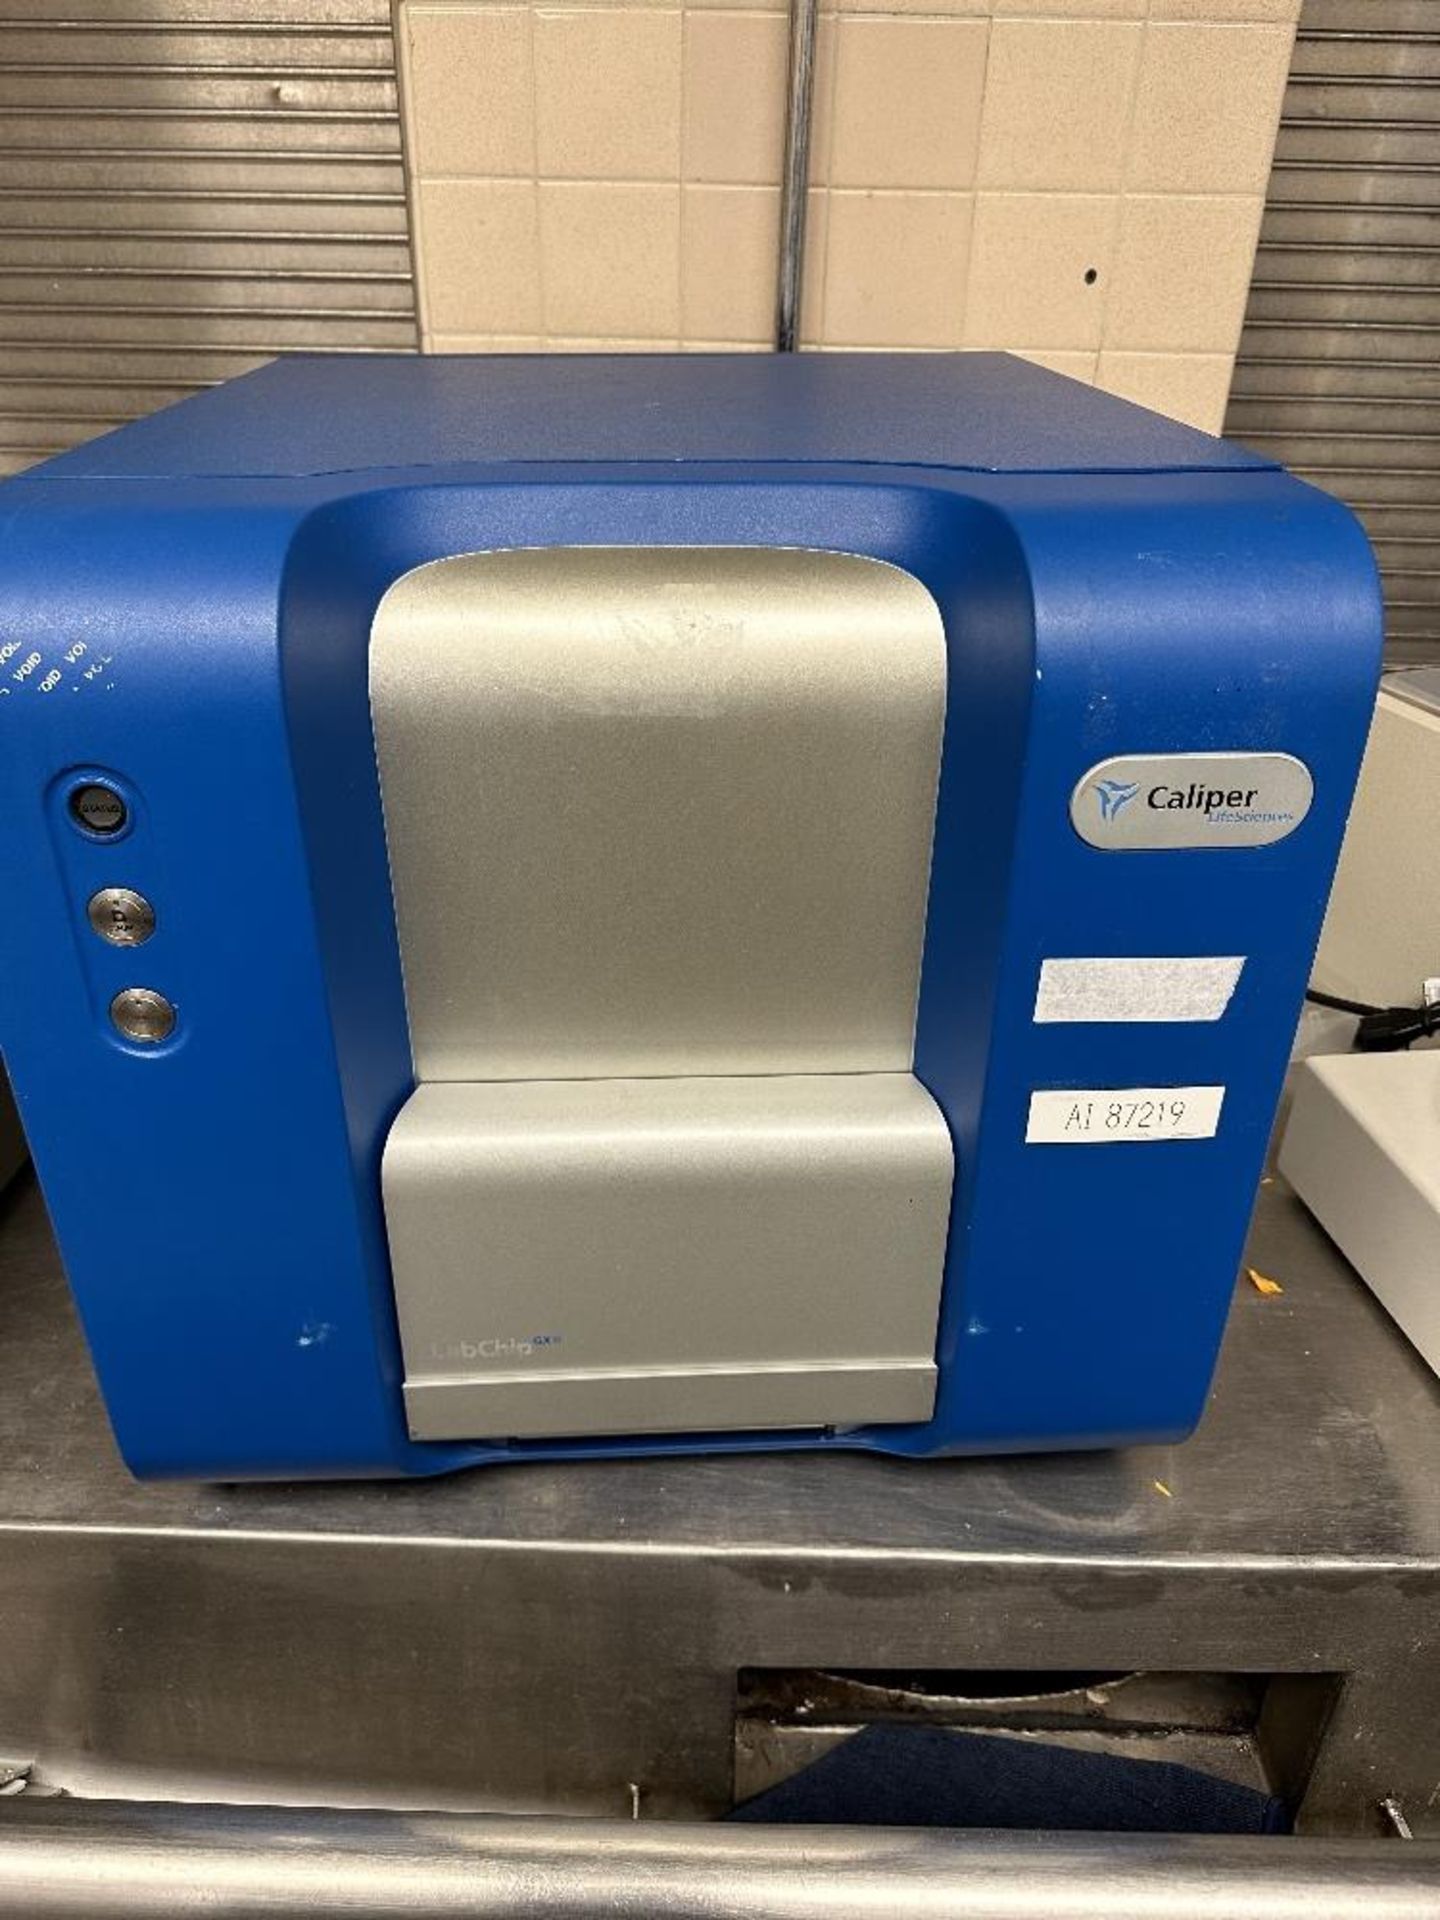 LabChip GXII Touch HT Protein Characterization System (LOCATED IN MIDDLETOWN, N.Y.)-FOR